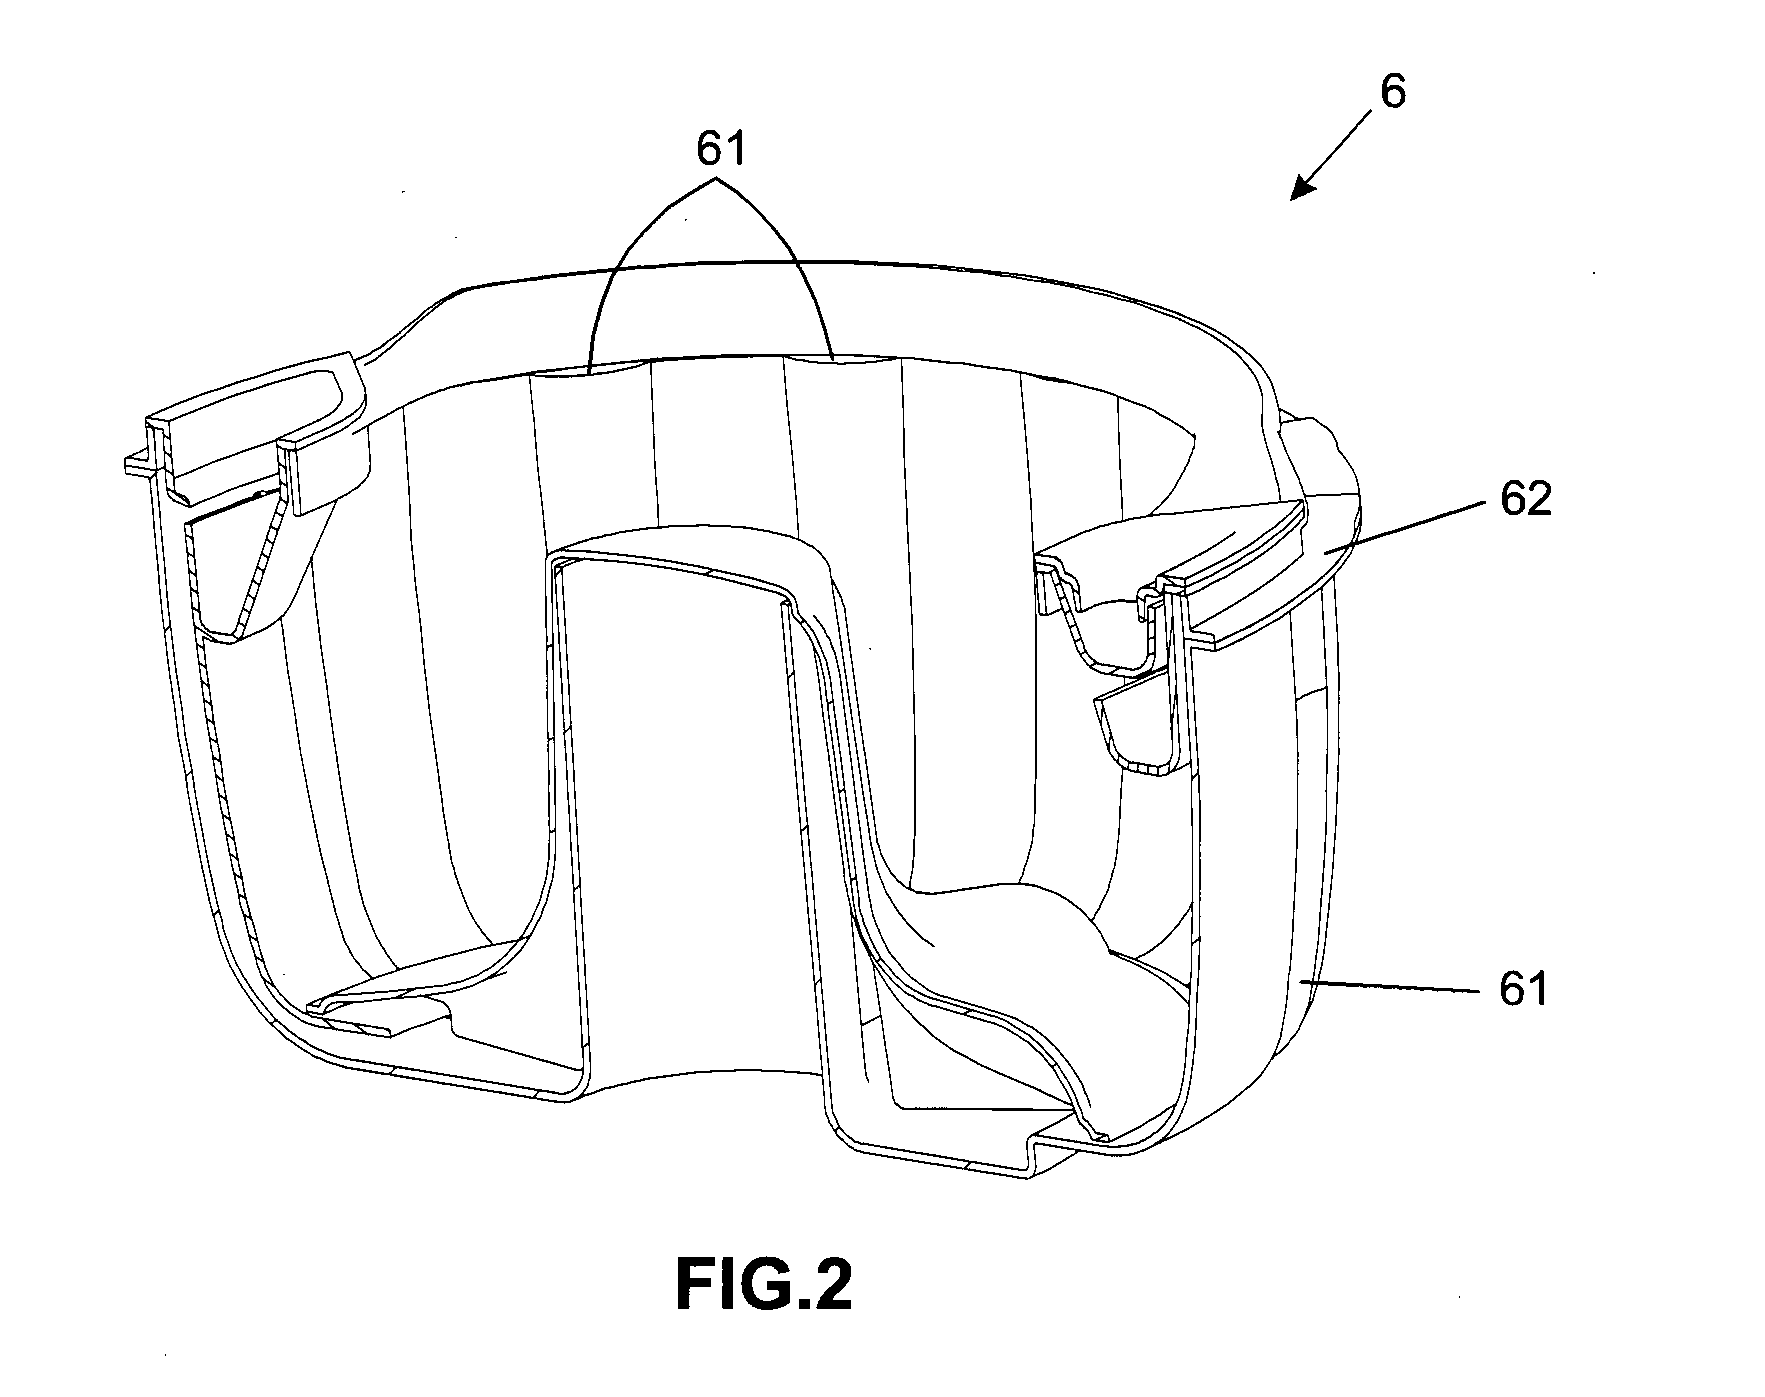 Coupling system of removable compartment for applicances